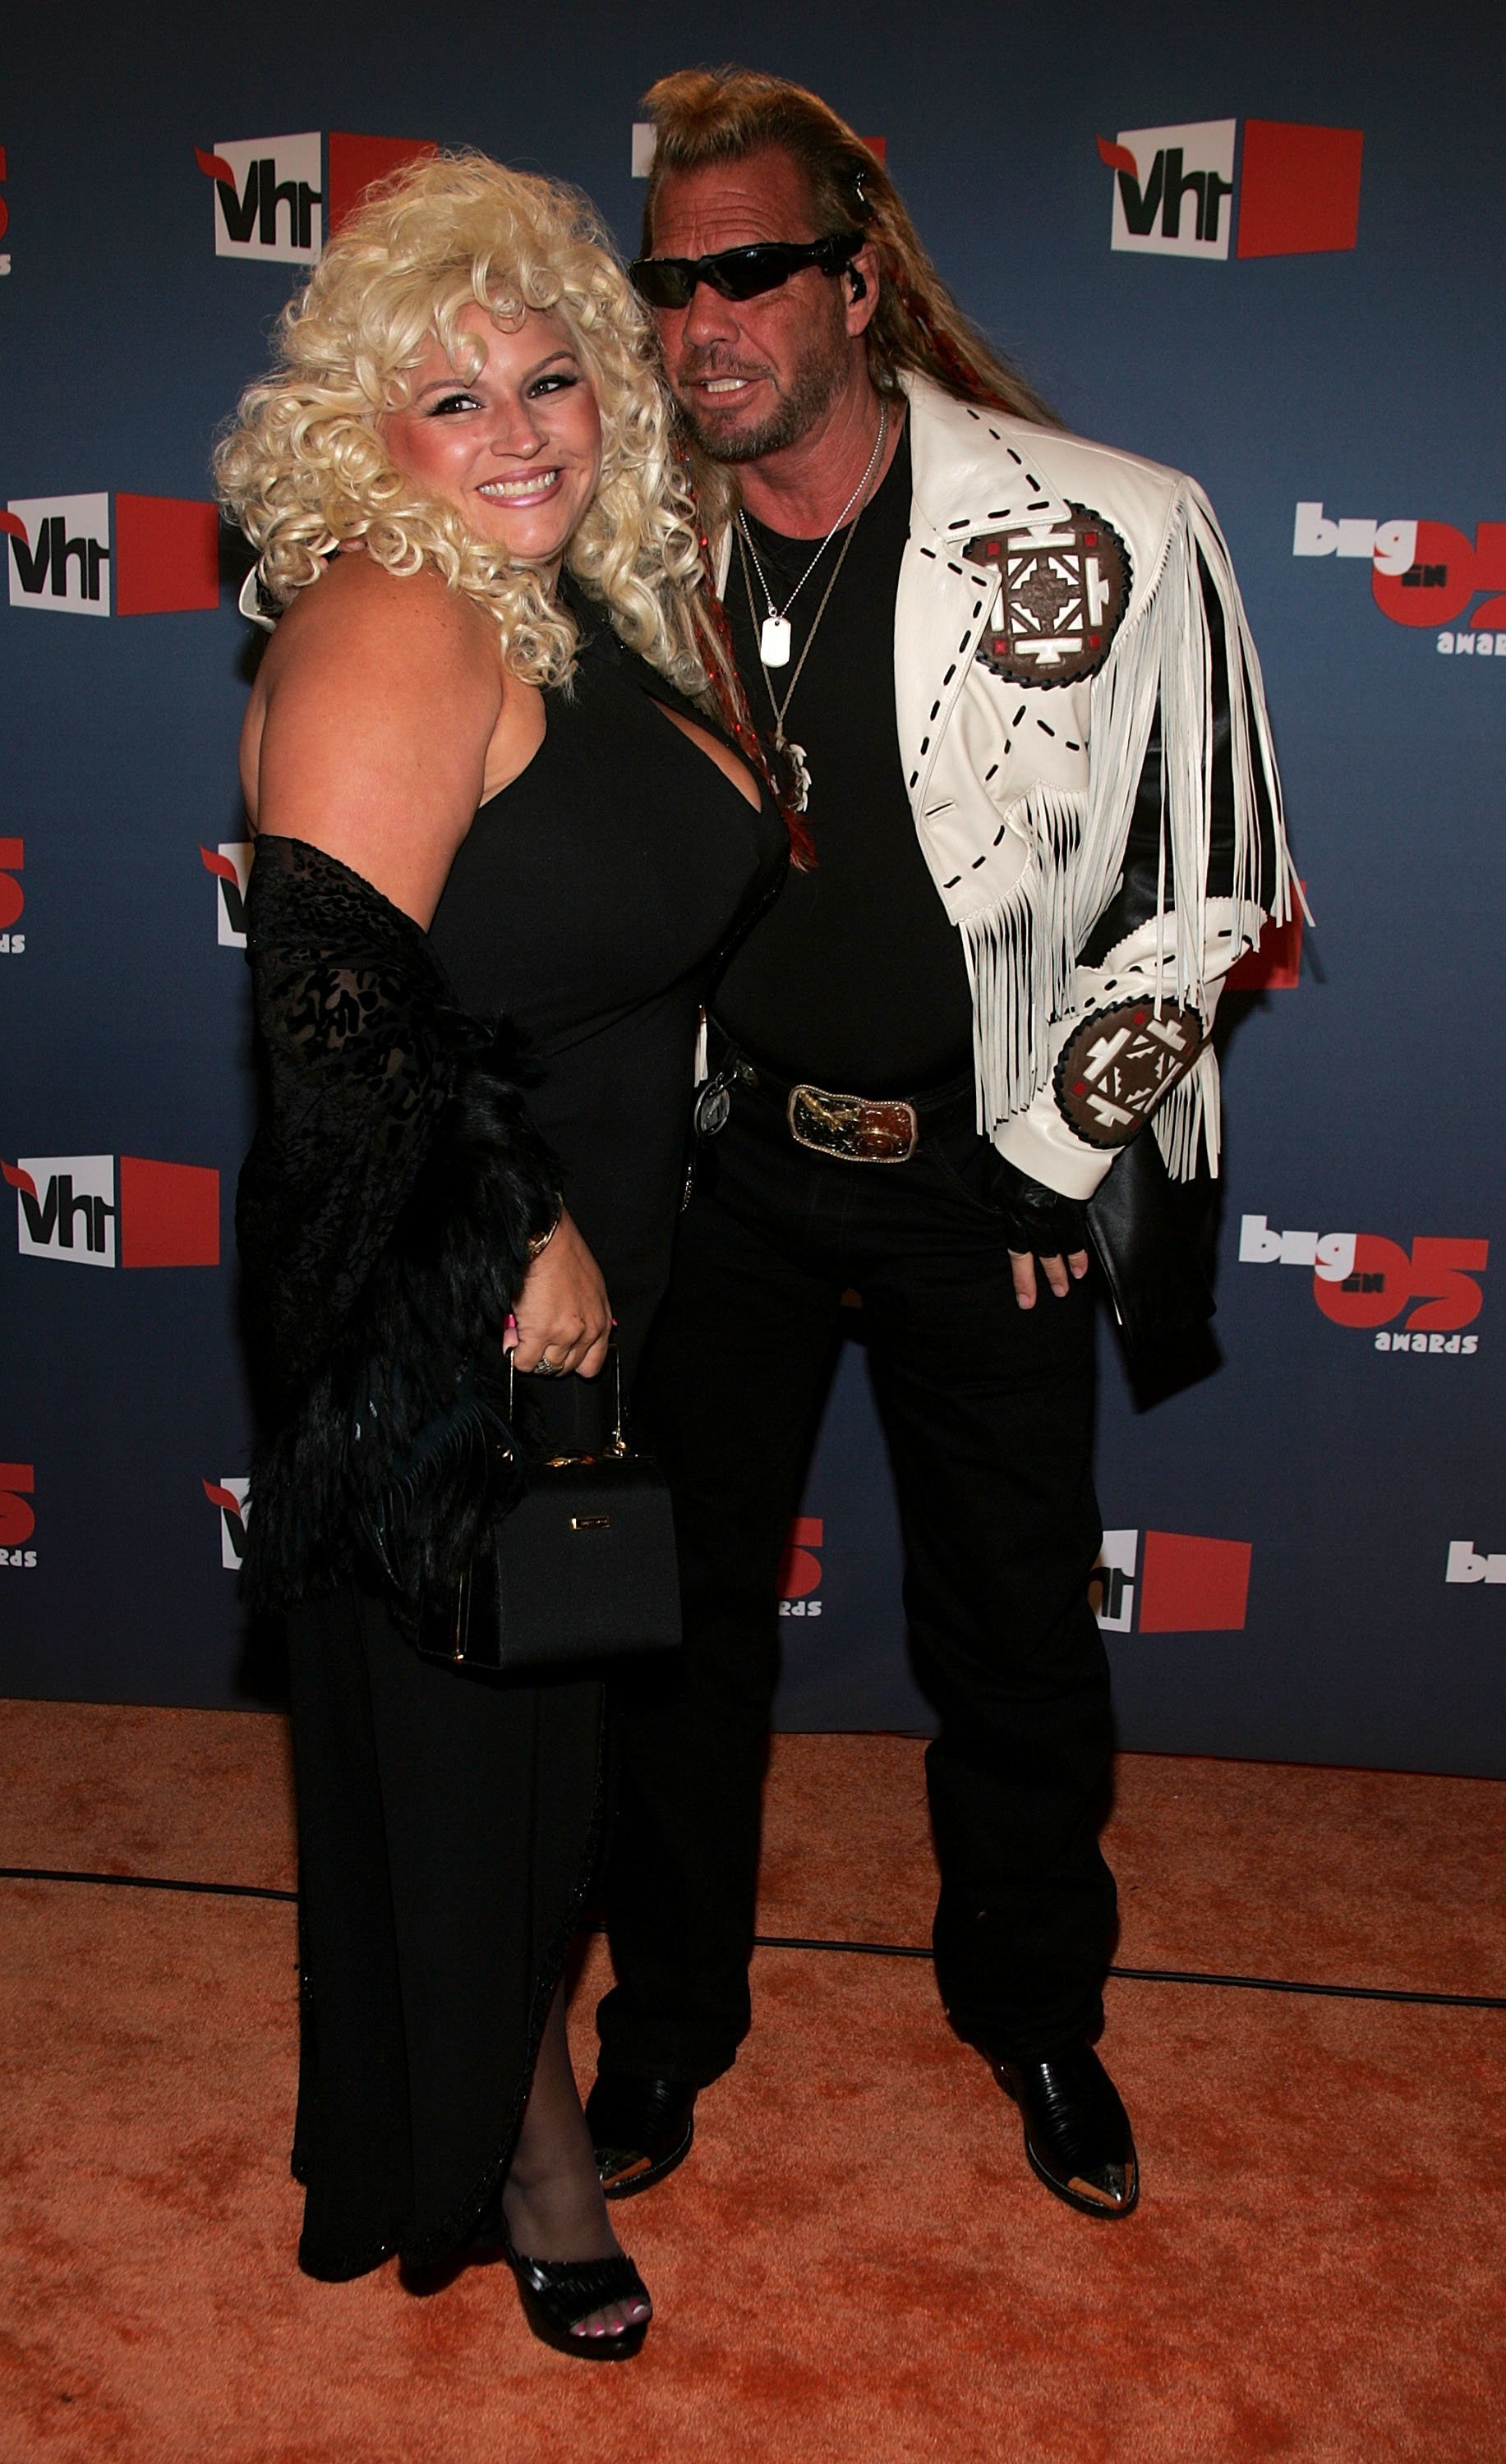 Duane "Dog" Chapman and Beth Chapman at the VH1 Big In '05 Awards on December 3, 2005 | Photo: GettyImages